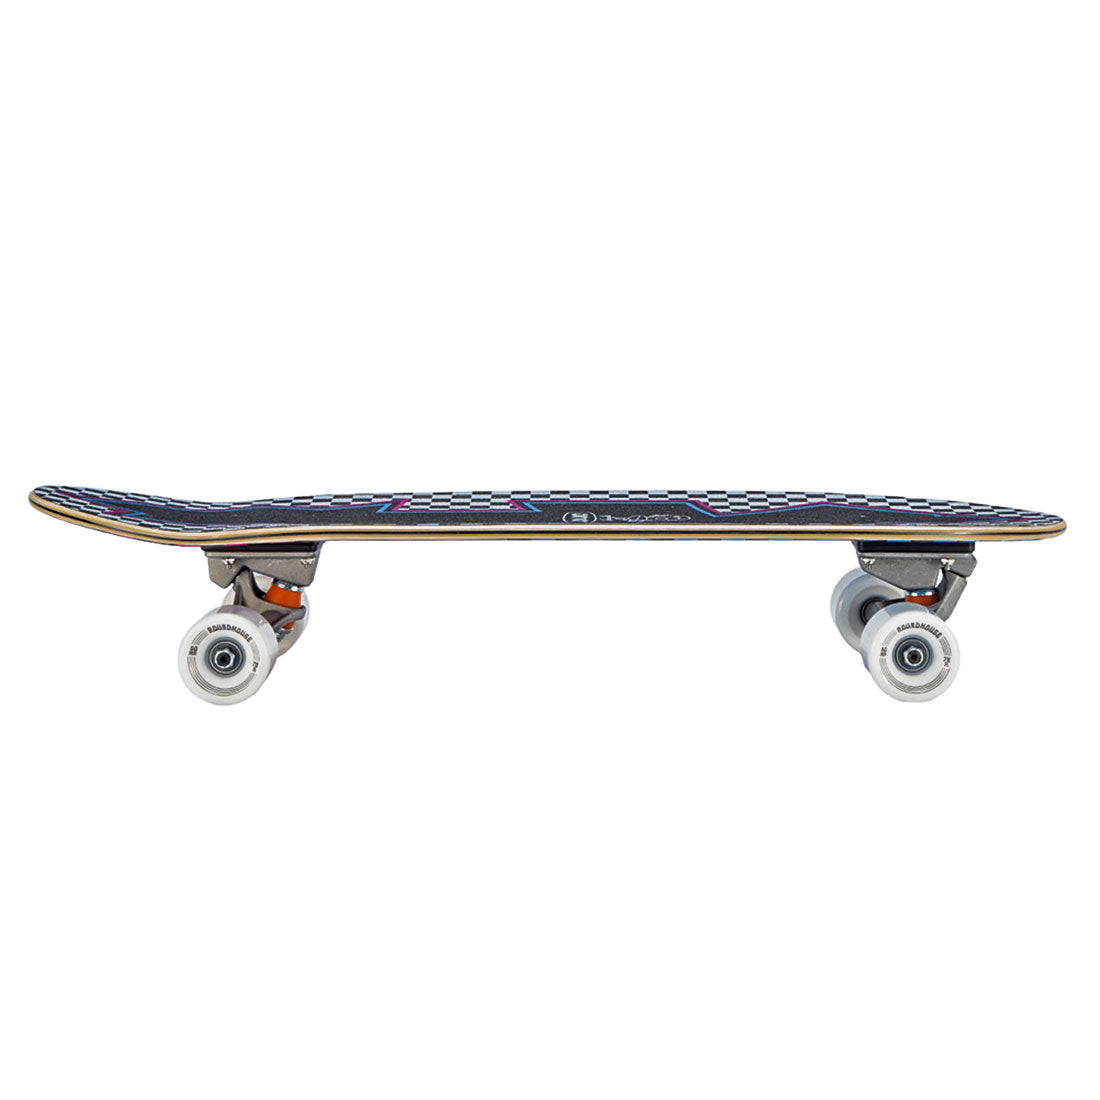 Carver Rail Blazer 28 C5 Mini Complete Skateboard Compl Carving and Specialty